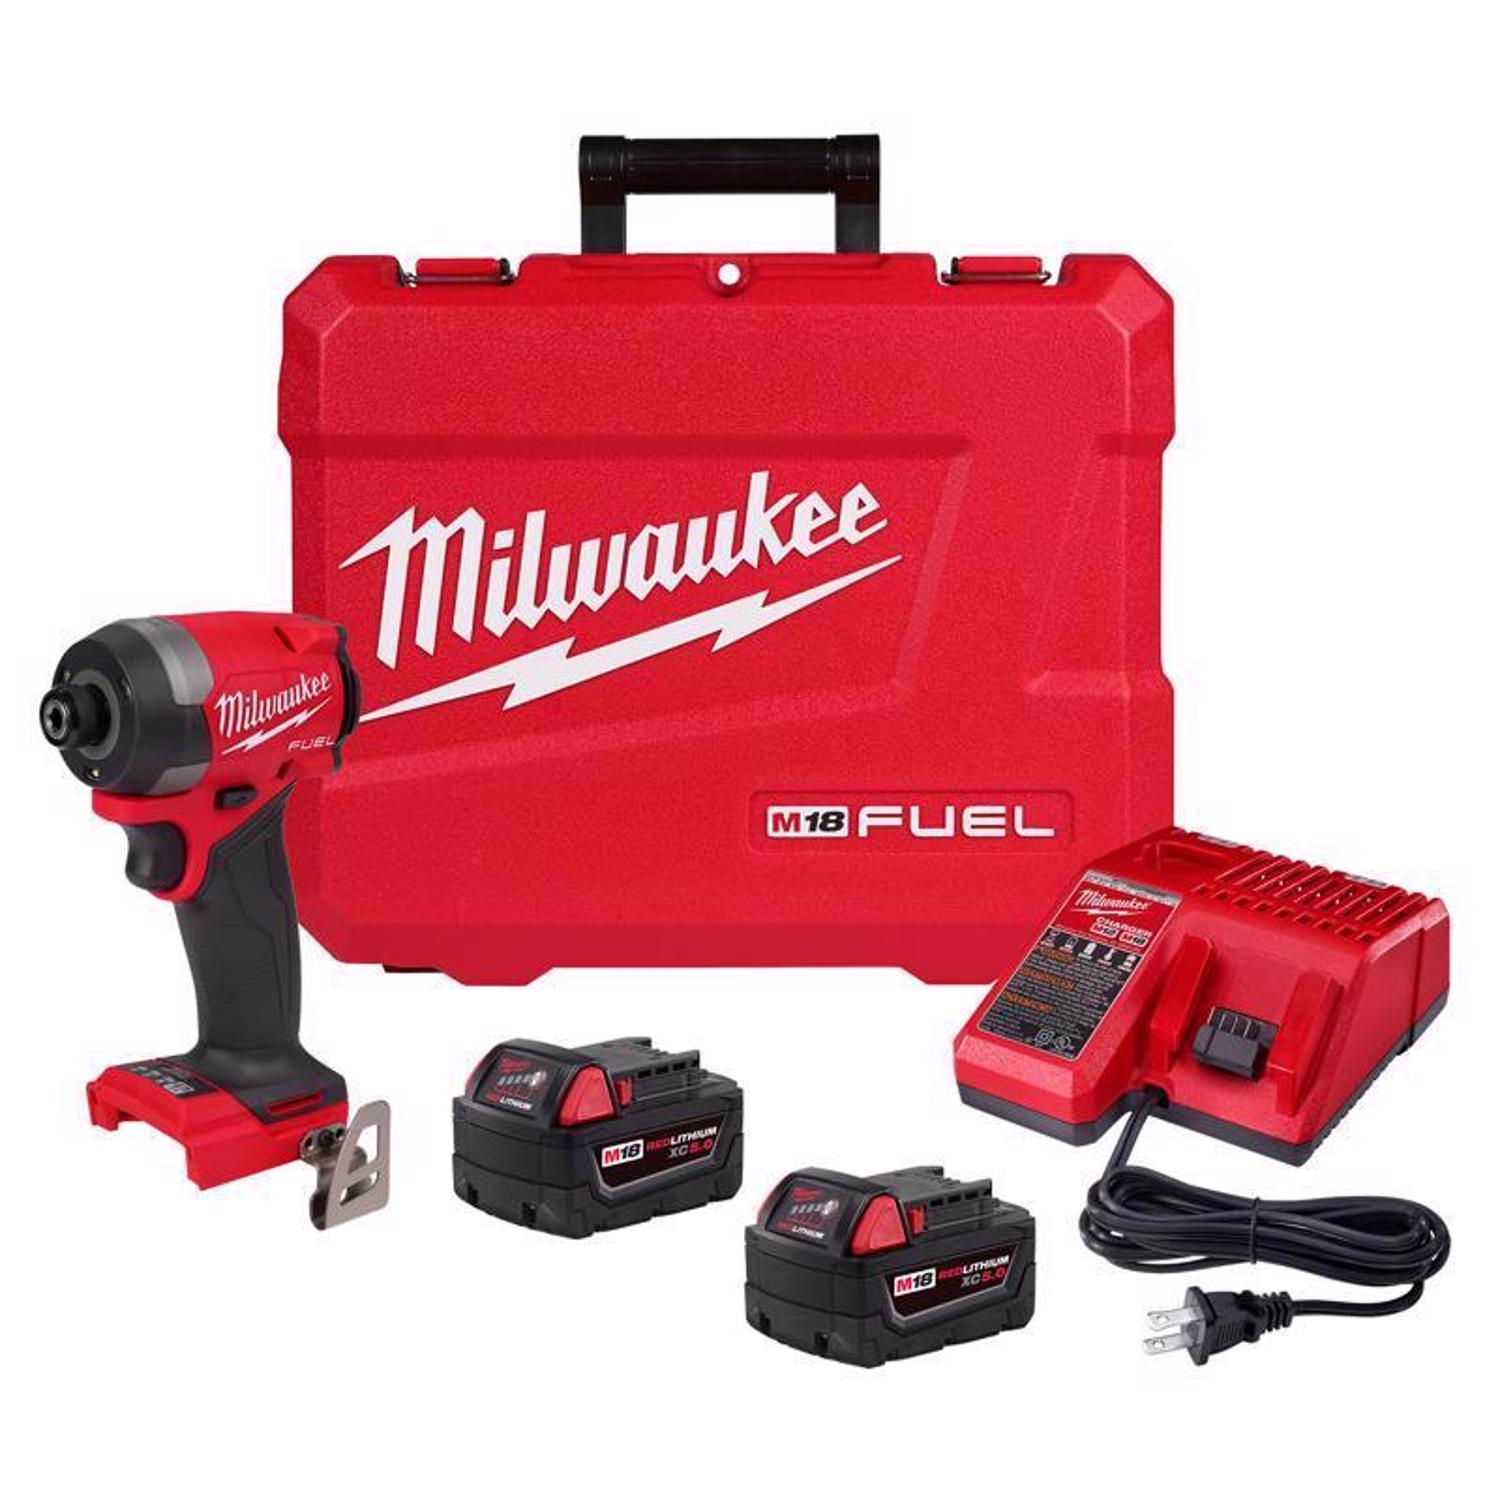 Photos - Drill / Screwdriver Milwaukee M18 FUEL 1/4 in. Cordless Brushless Impact Driver Kit (Battery & 